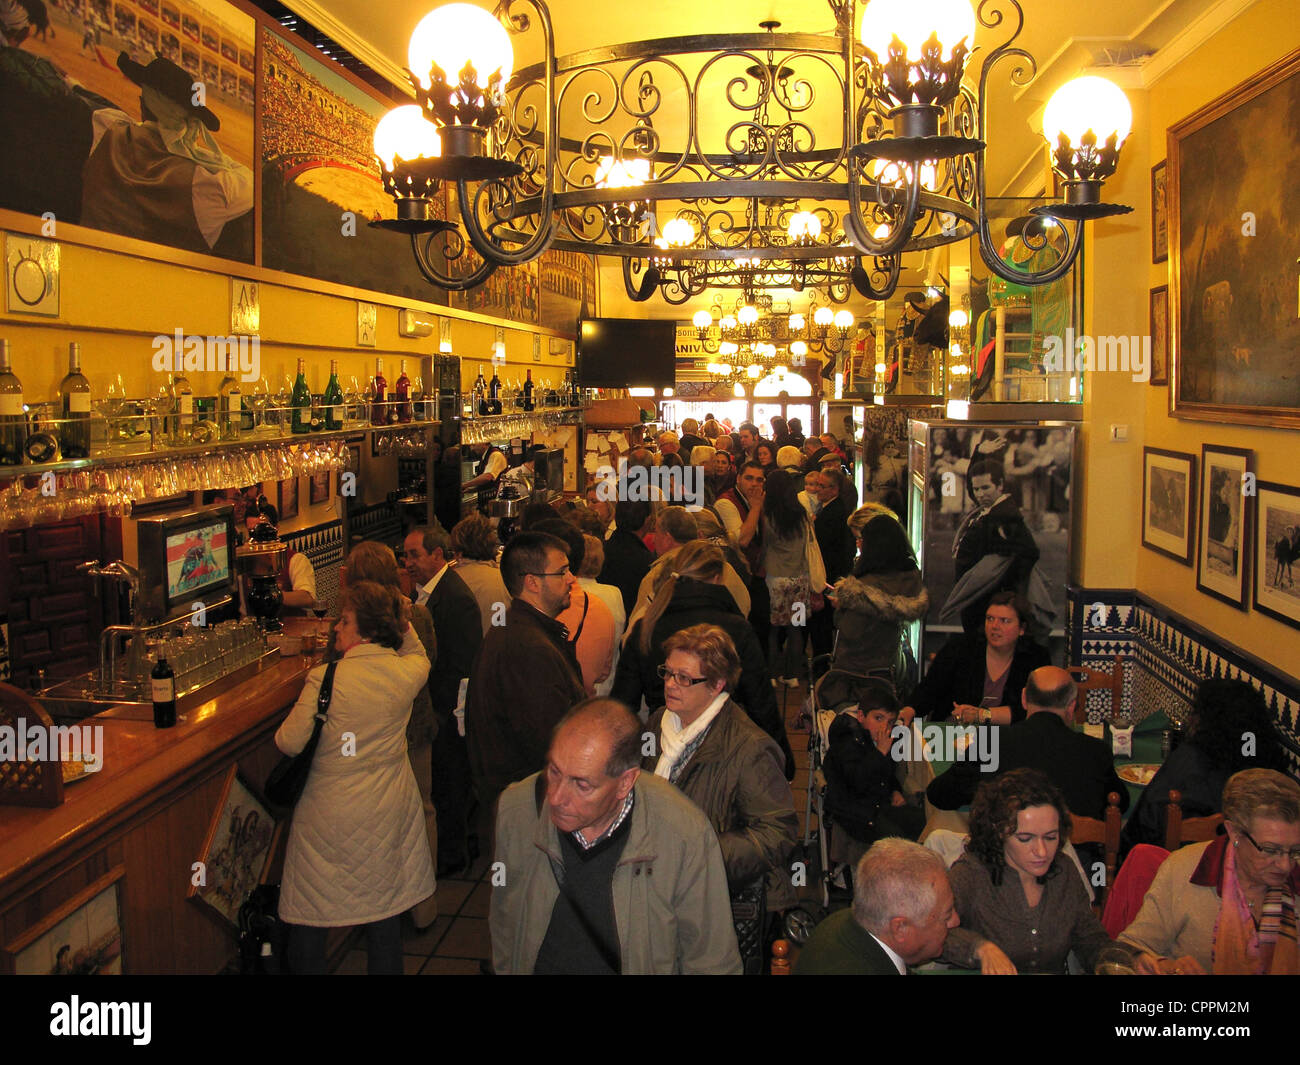 Spain Andalusia Seville people having lunch Tapas in Bodega wine cellar bar Stock Photo